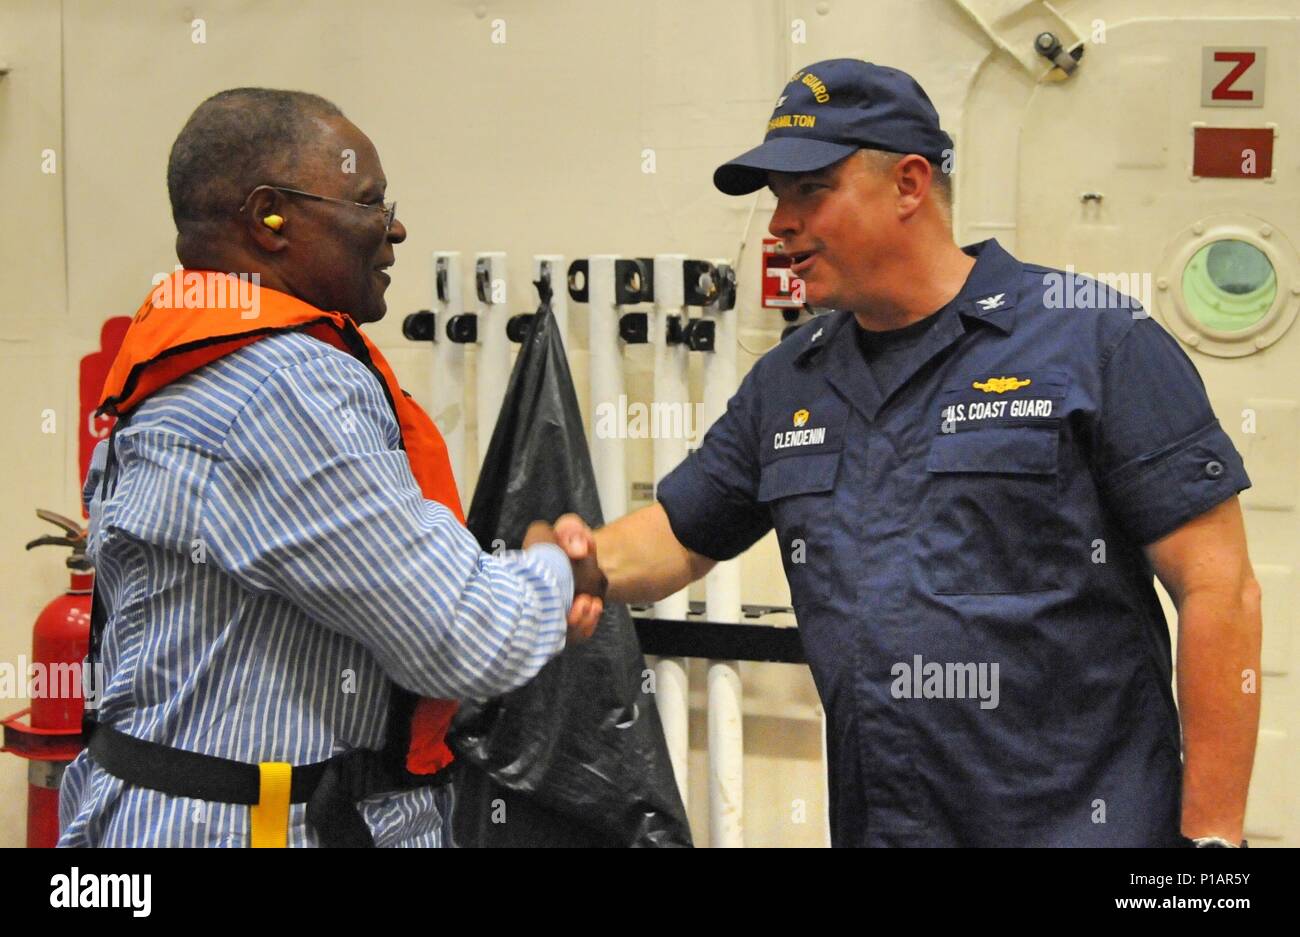 Coast Guard Capt. Scott Clendenin, commanding officer of the Coast Guard Cutter Hamilton, homeported in Charleston, South Carolina welcomes the President of Haiti, Jocelerme Privert, aboard the Hamilton off the coast of Jeremie, Haiti, Saturday, Oct. 8, 2016. The Hamilton crew transported disaster relief supplies to the country after it was affected by Hurricane Matthew. U.S. Coast Guard photo by Petty Officer 1st Class Joseph Cook. Stock Photo